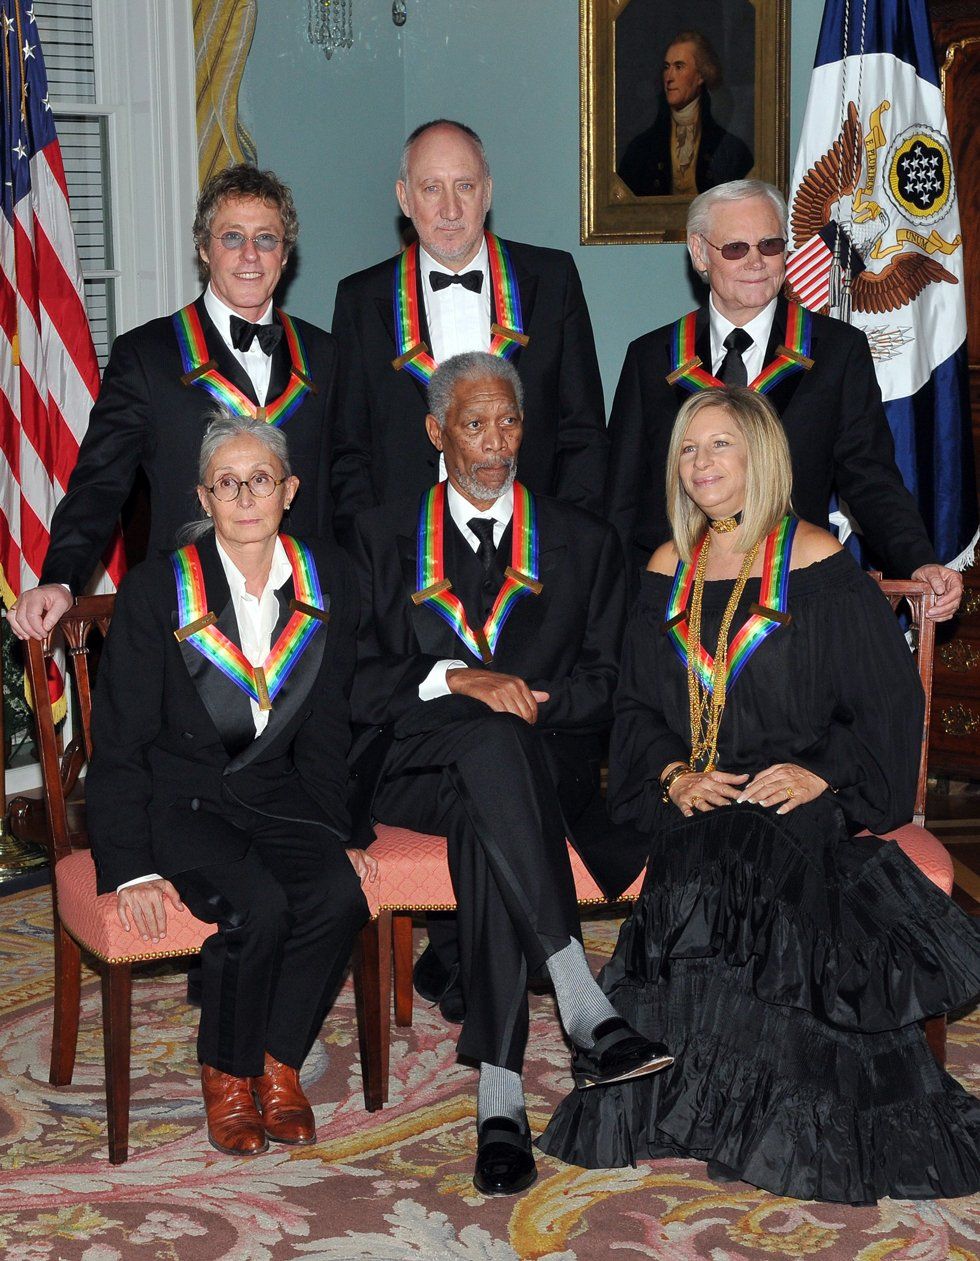 Group shot of 2008 Kennedy Center honorees.